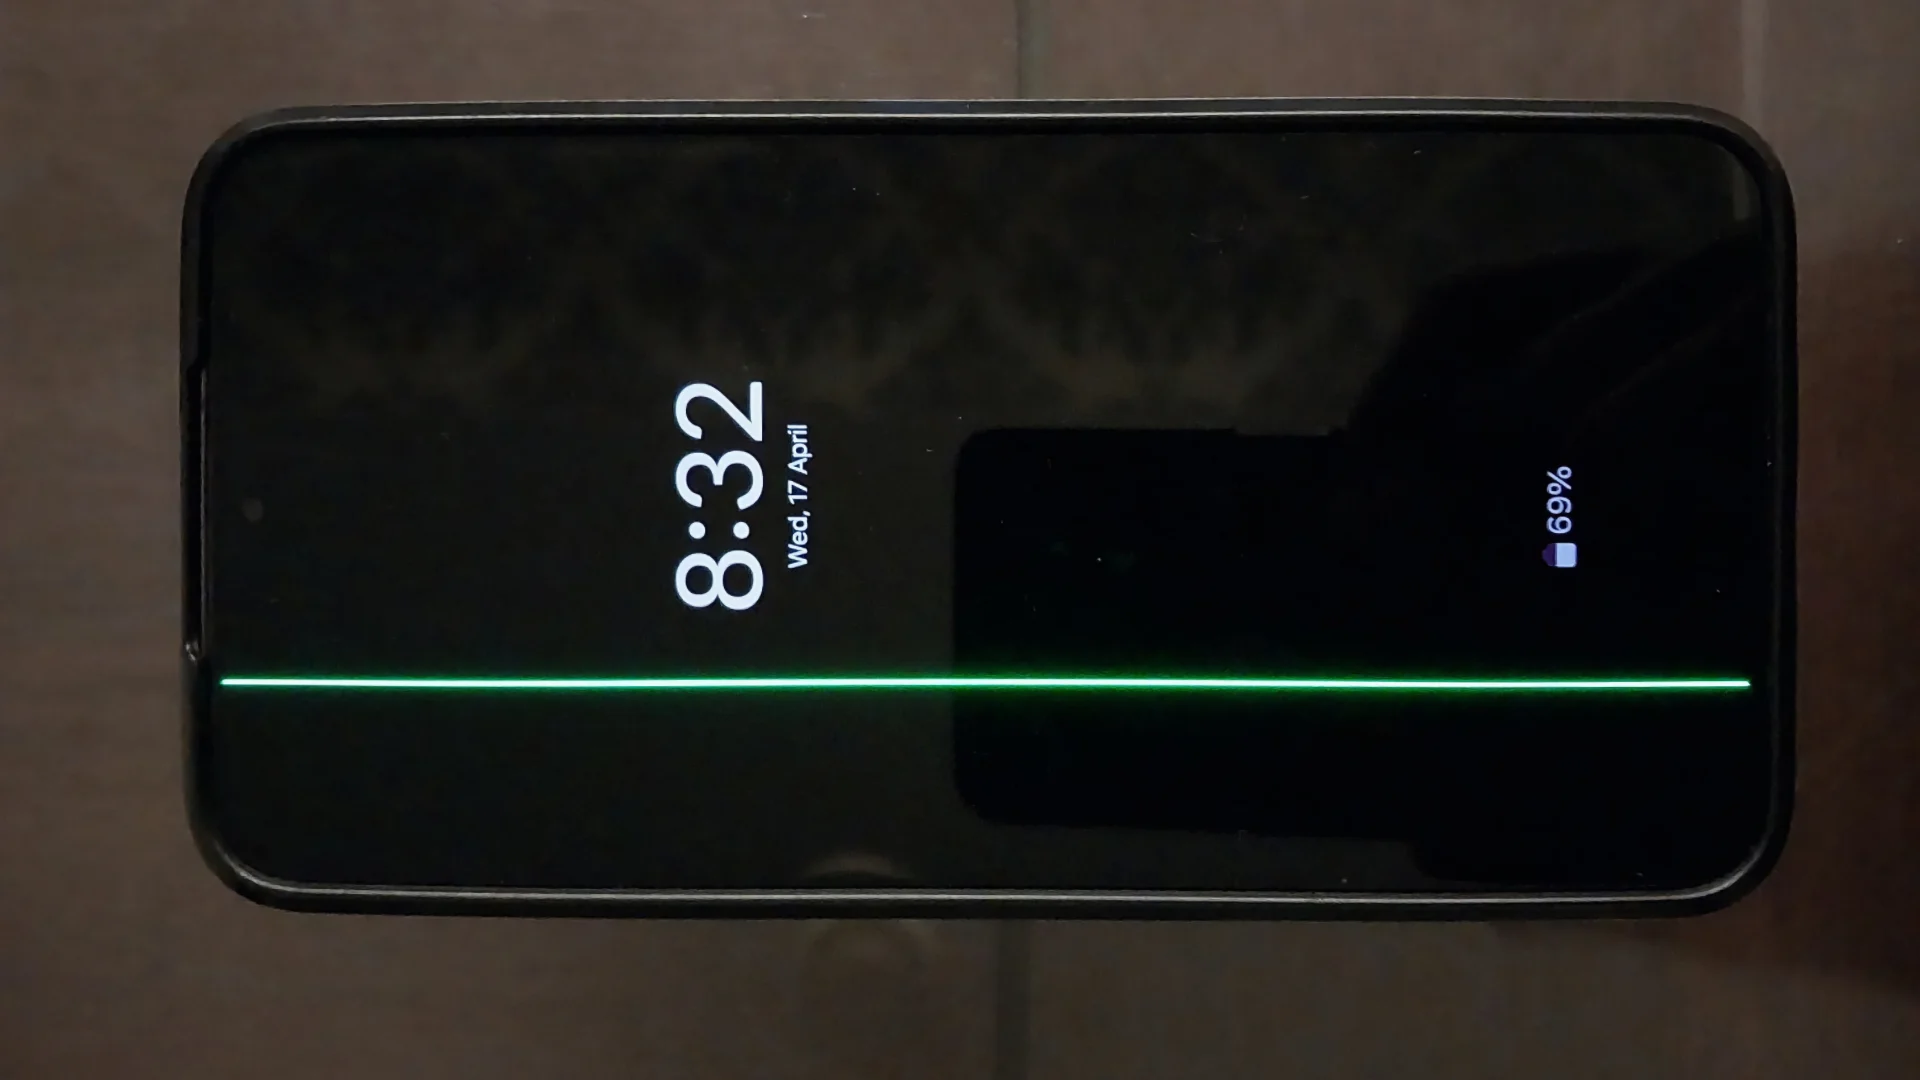 Samsung Galaxy Devices Face Green Line Display Issue After Updates